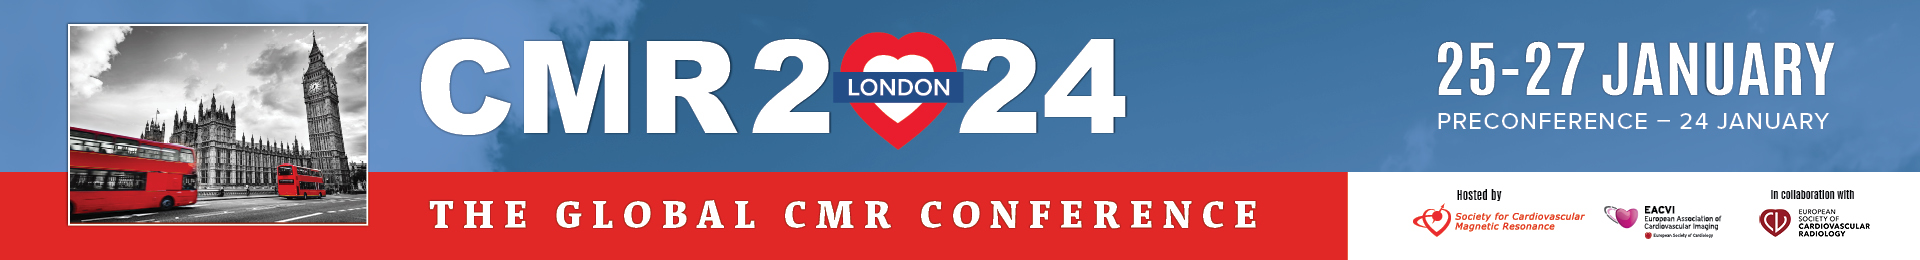 CMR2024 Conference Event Banner